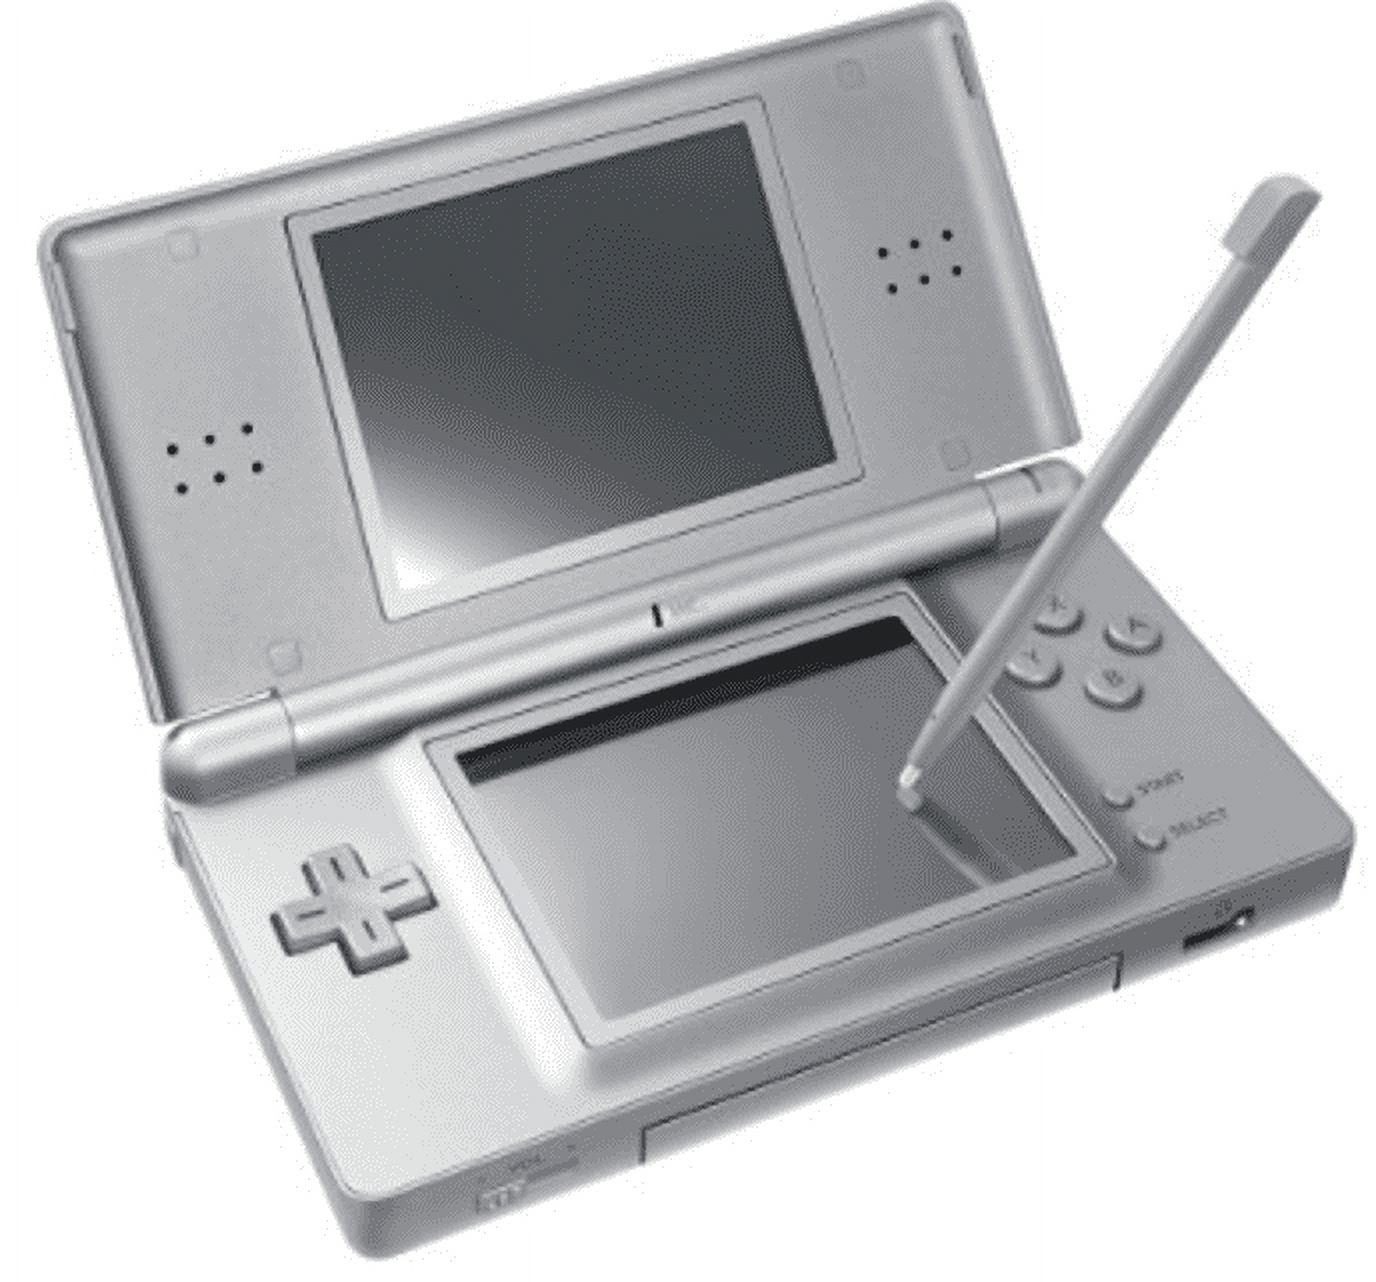 Authentic Nintendo DS Lite Metallic Silver Gray with Stylus and Charger - 100% OEM - image 1 of 3